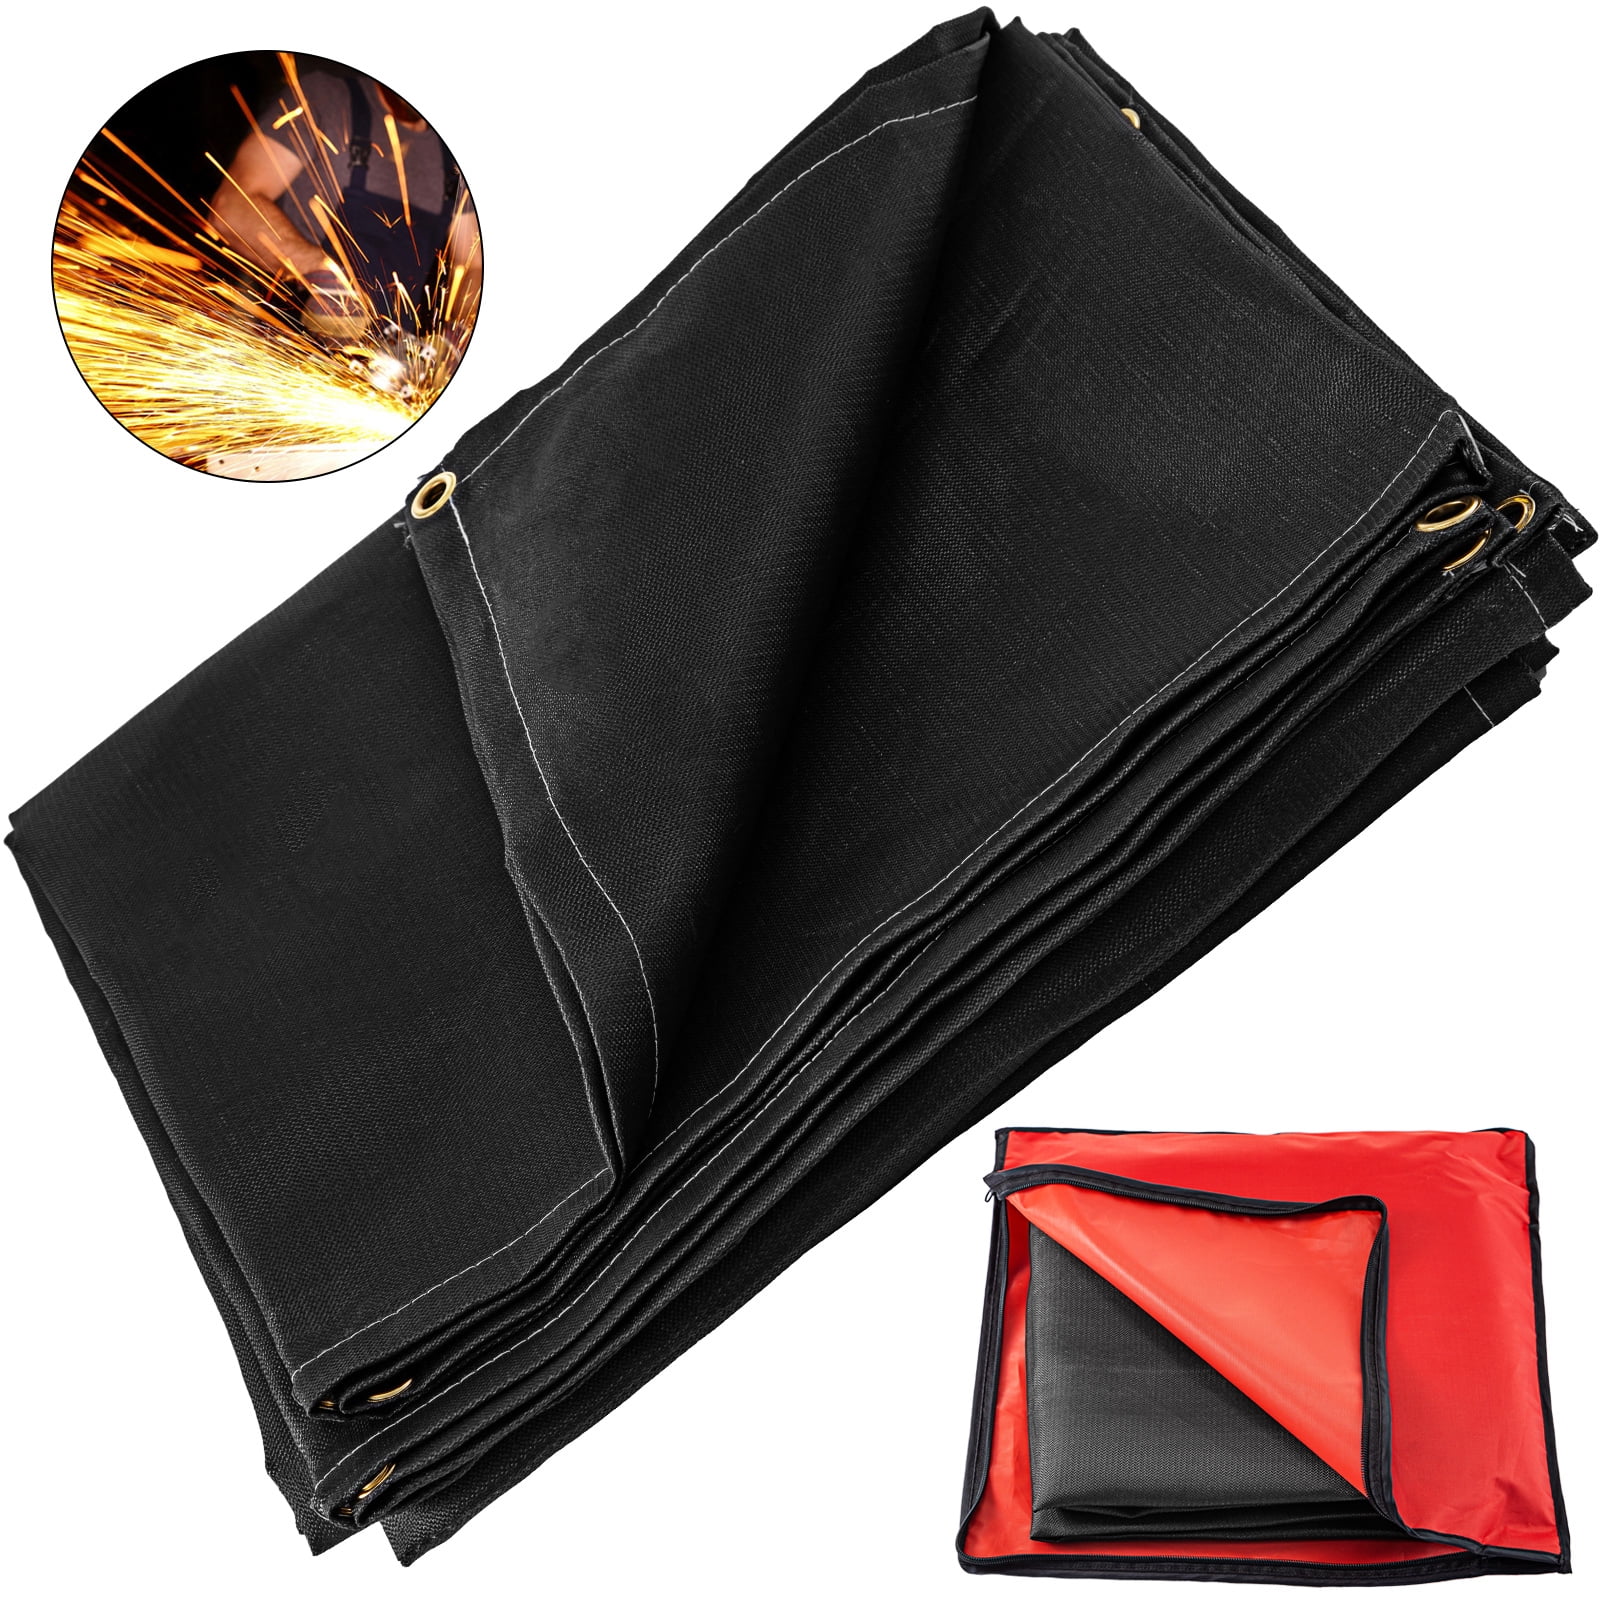 Welding Blanket Fireproof Fire Blanket for Home Fiberglass Heavy Duty Welding Blanket and Cover with Brass Grommets,Thermal Resistant Insulation 36 x 41 inches 